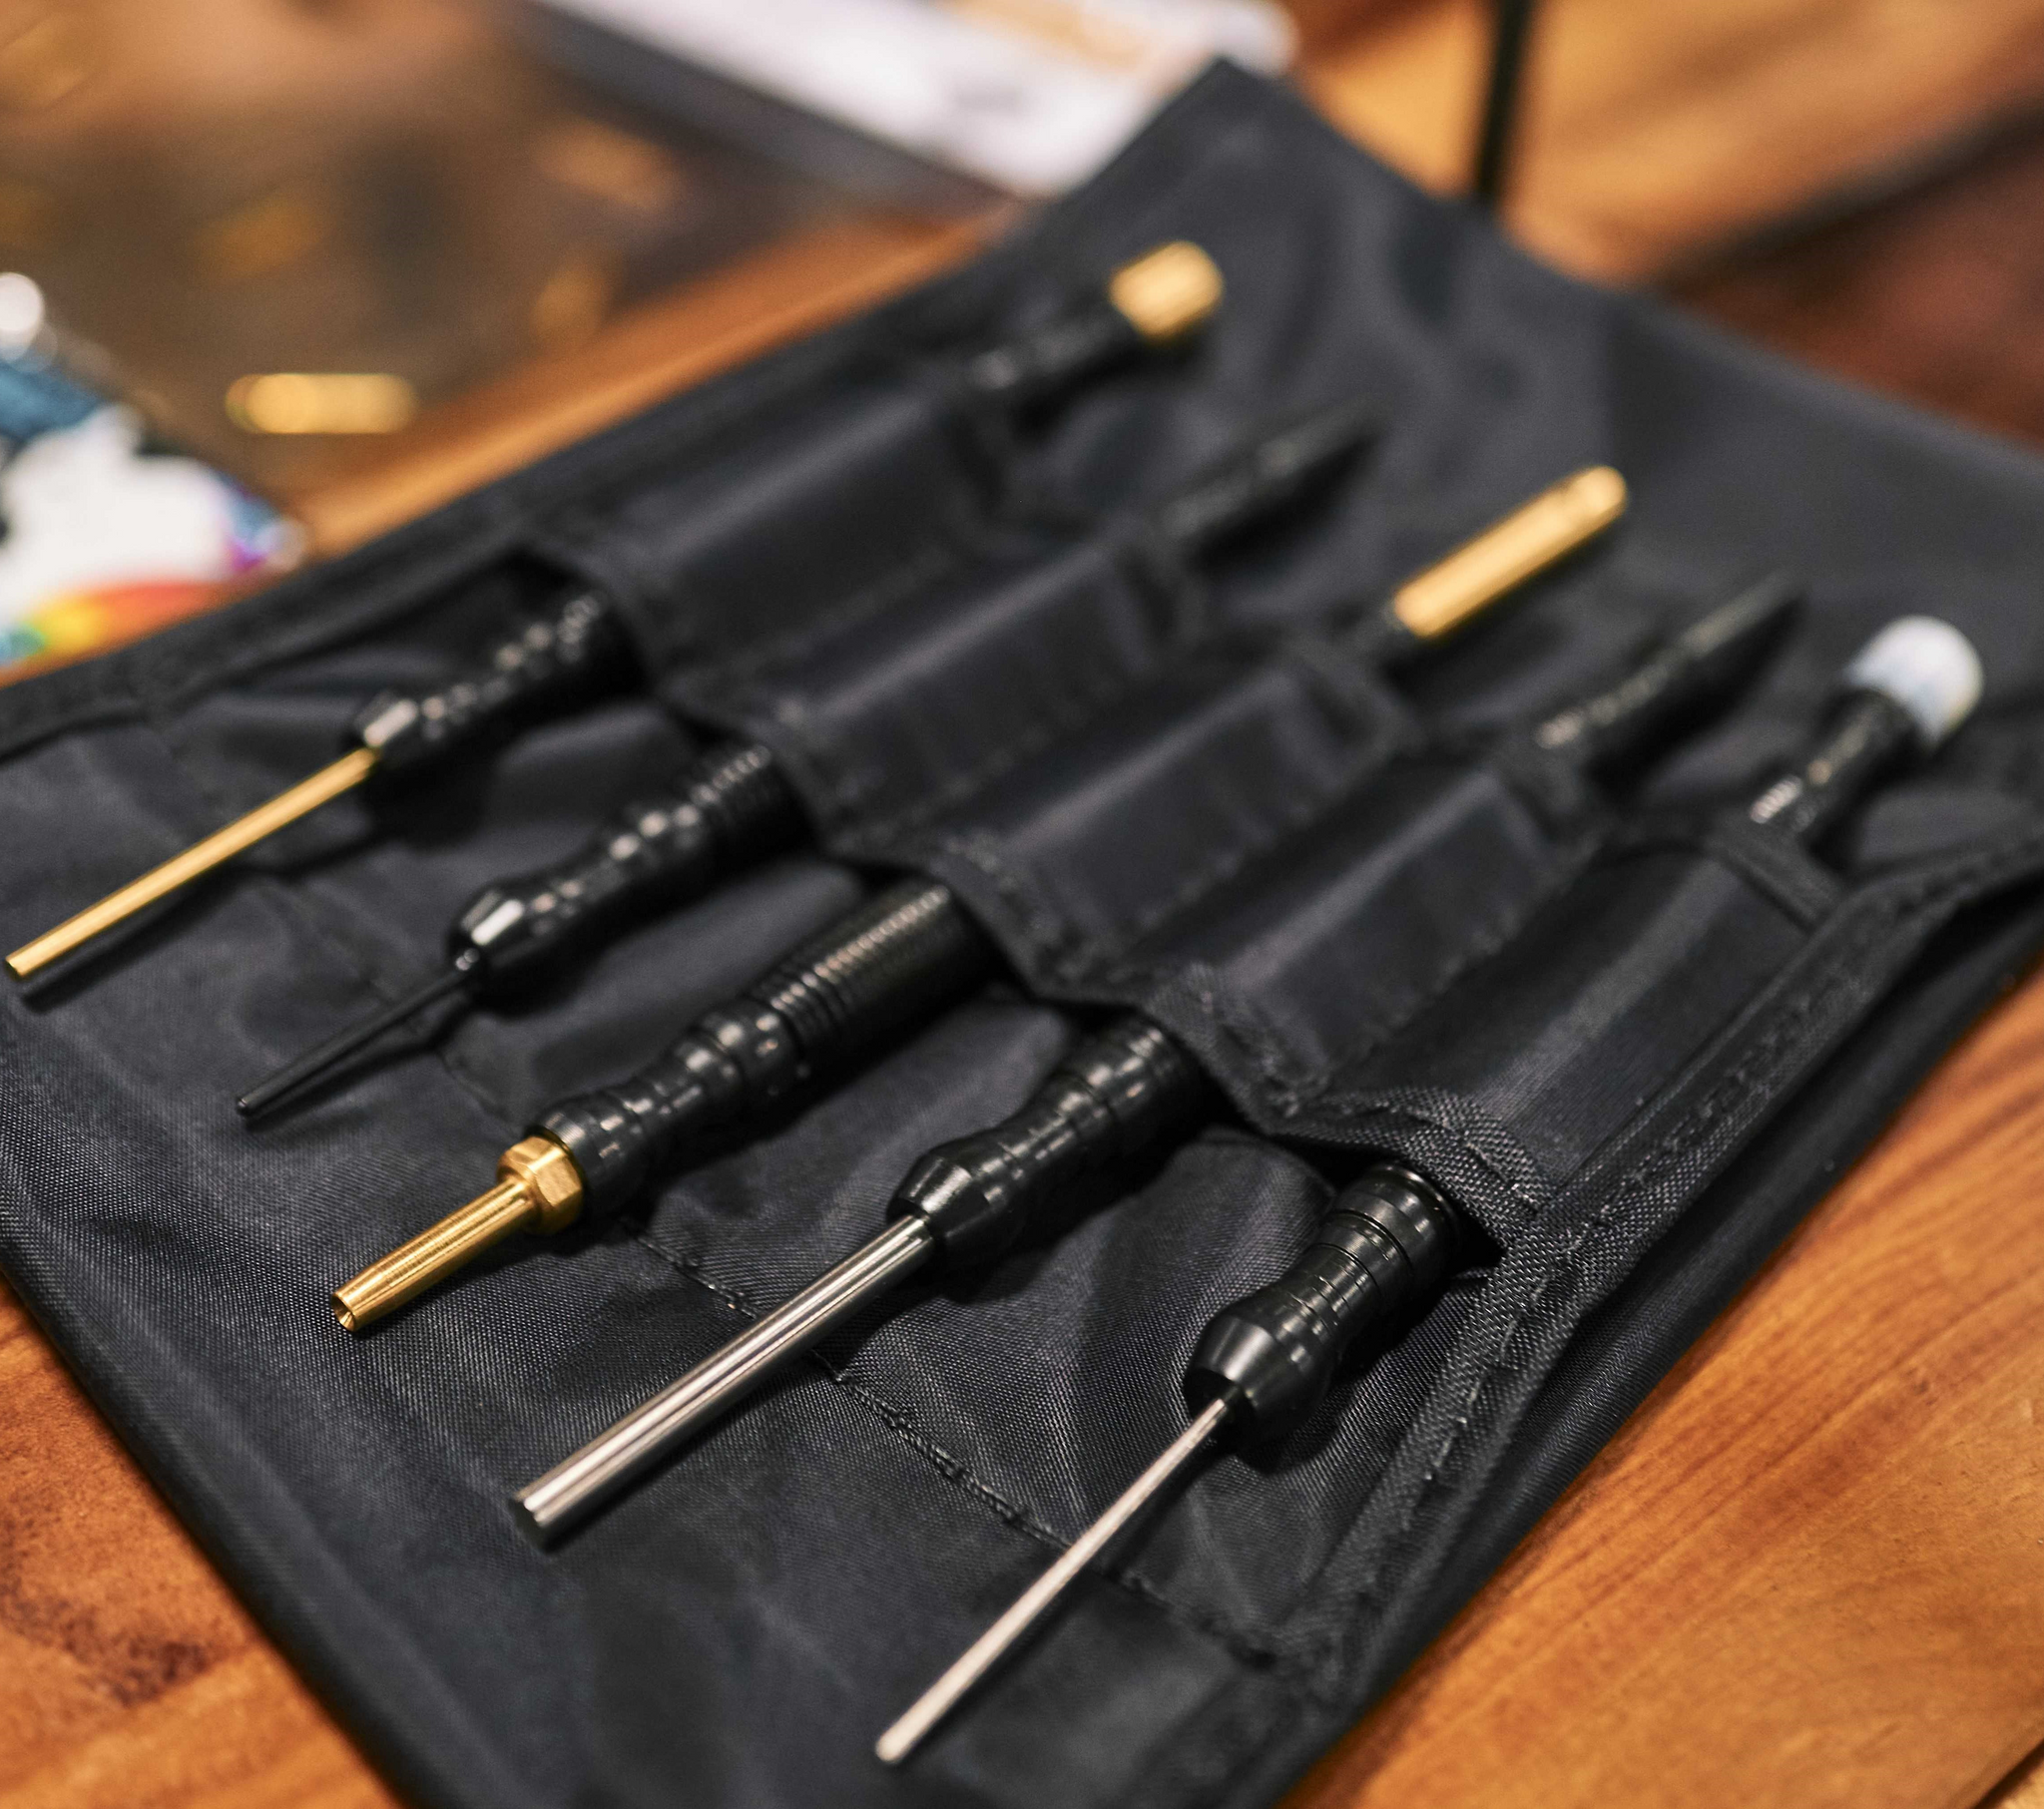 The 5-piece Gun Smith Set with cleaner. - AR TakeDown Tool